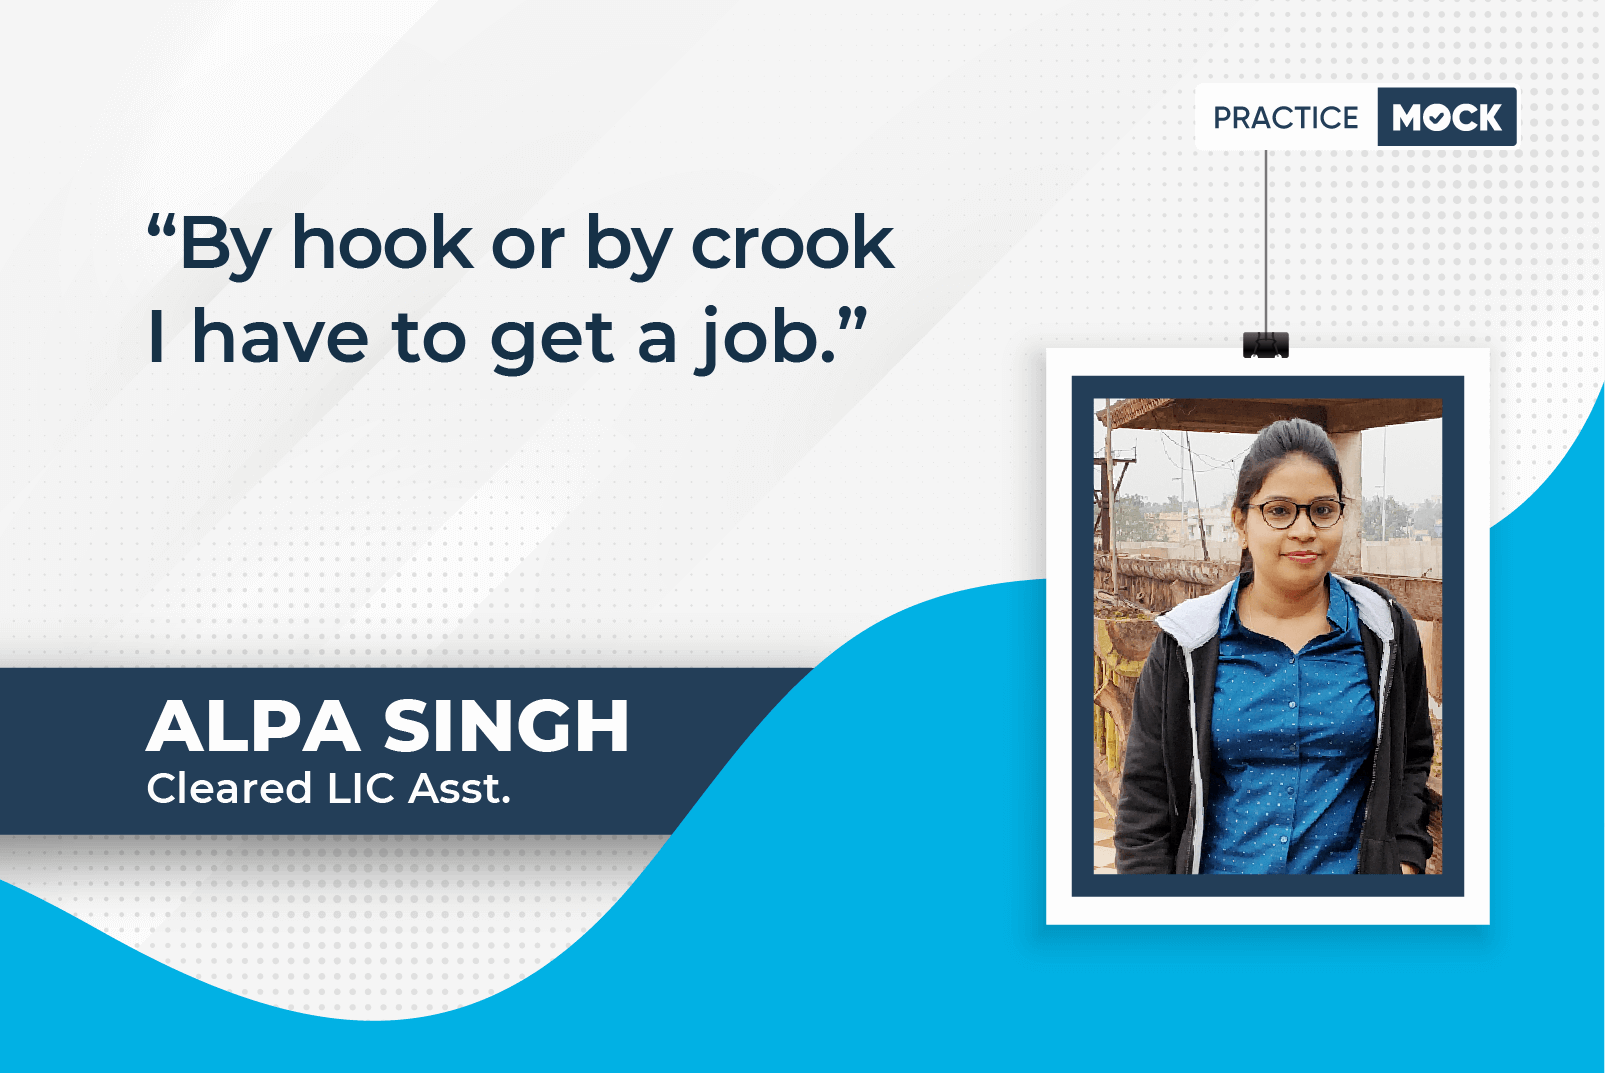 By hook or by crook I had to get a job -Alpa Singh- Cleared LIC Asst.